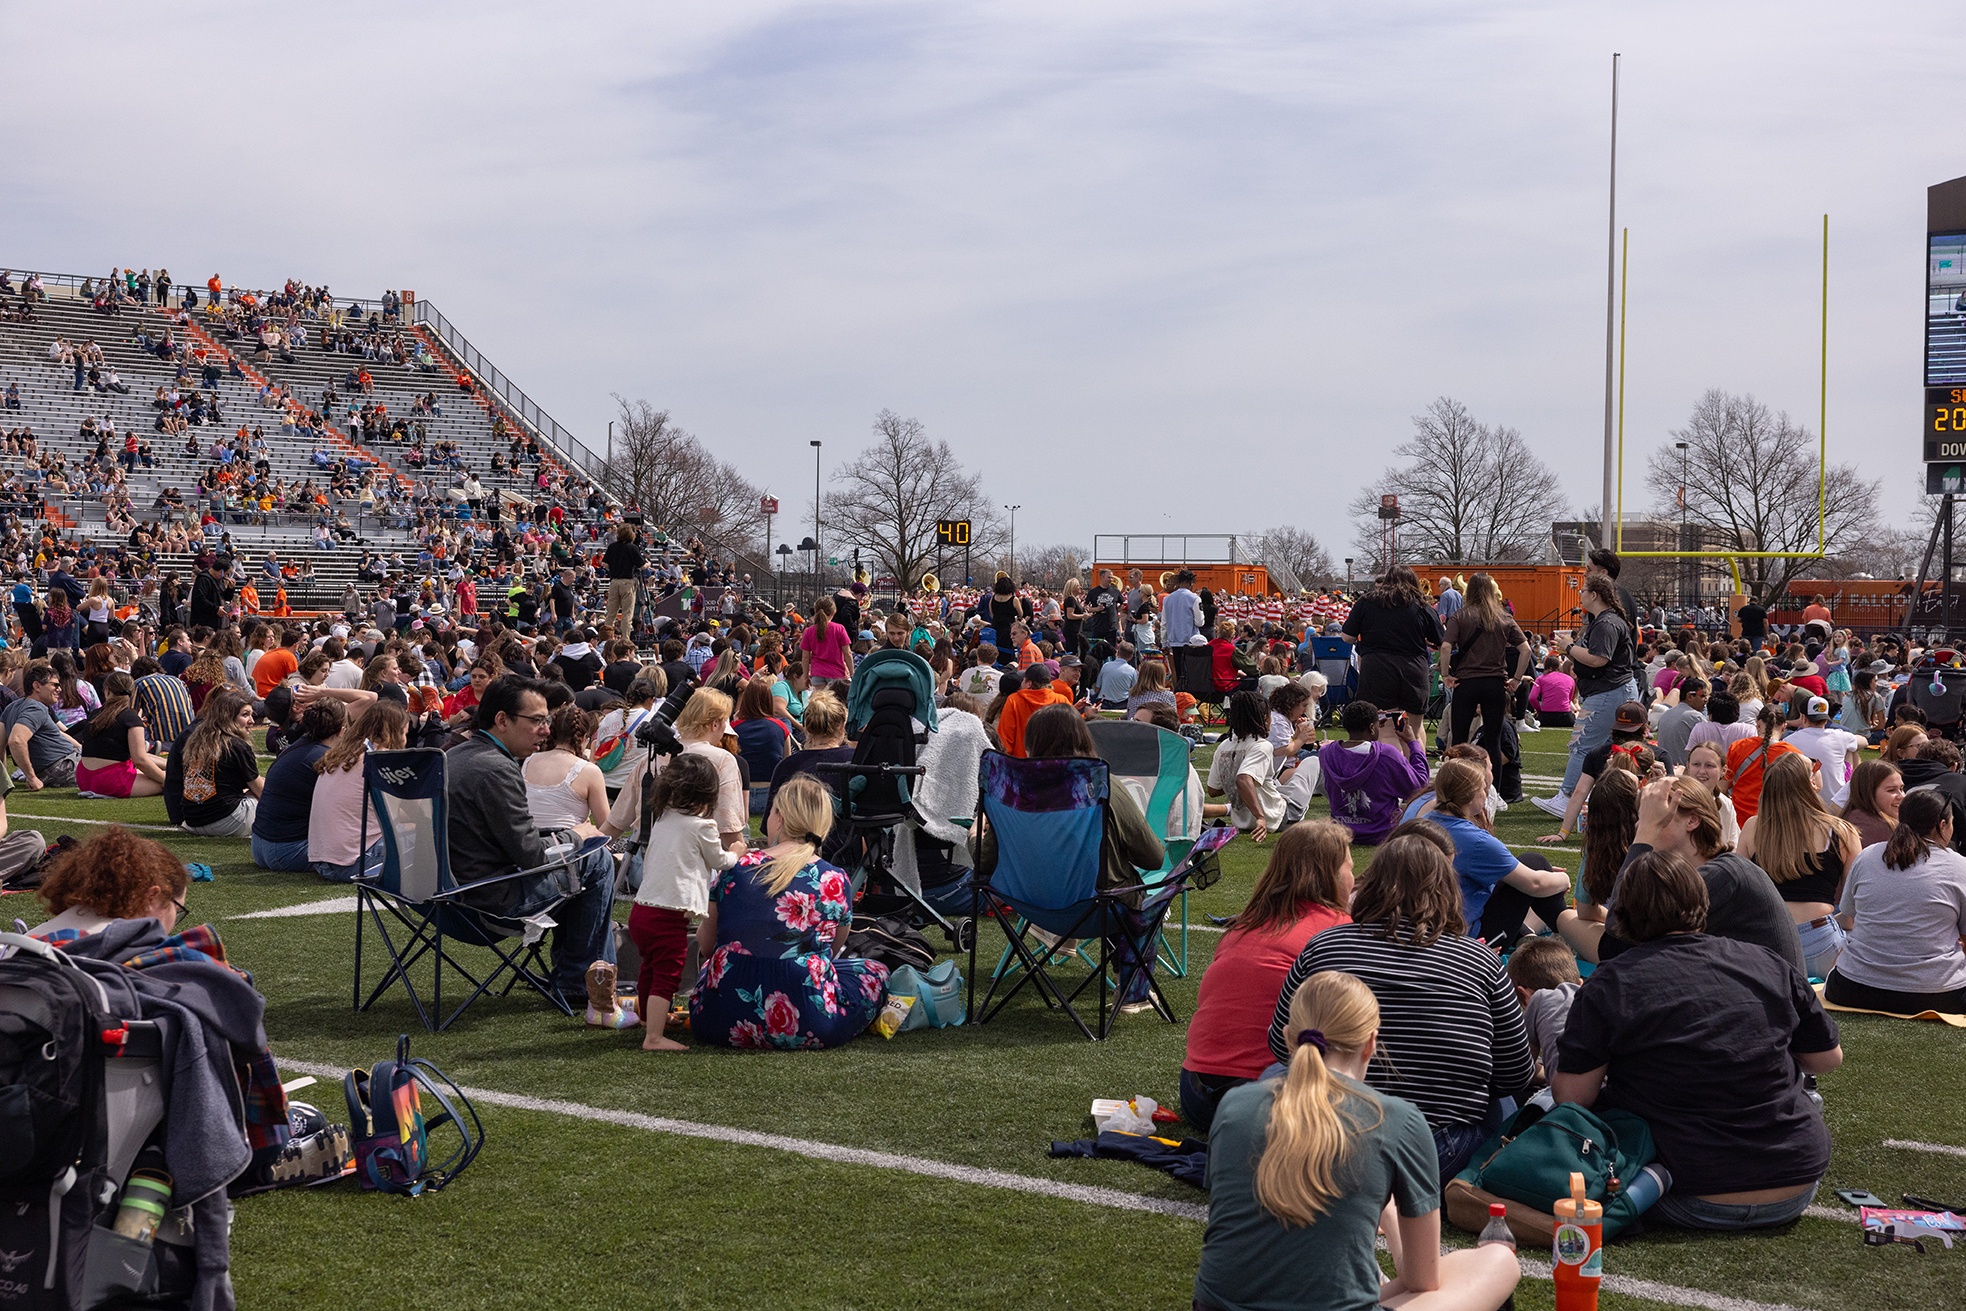 People in lawnchairs and blankets fill the field at Doyt L. Perry Stadium